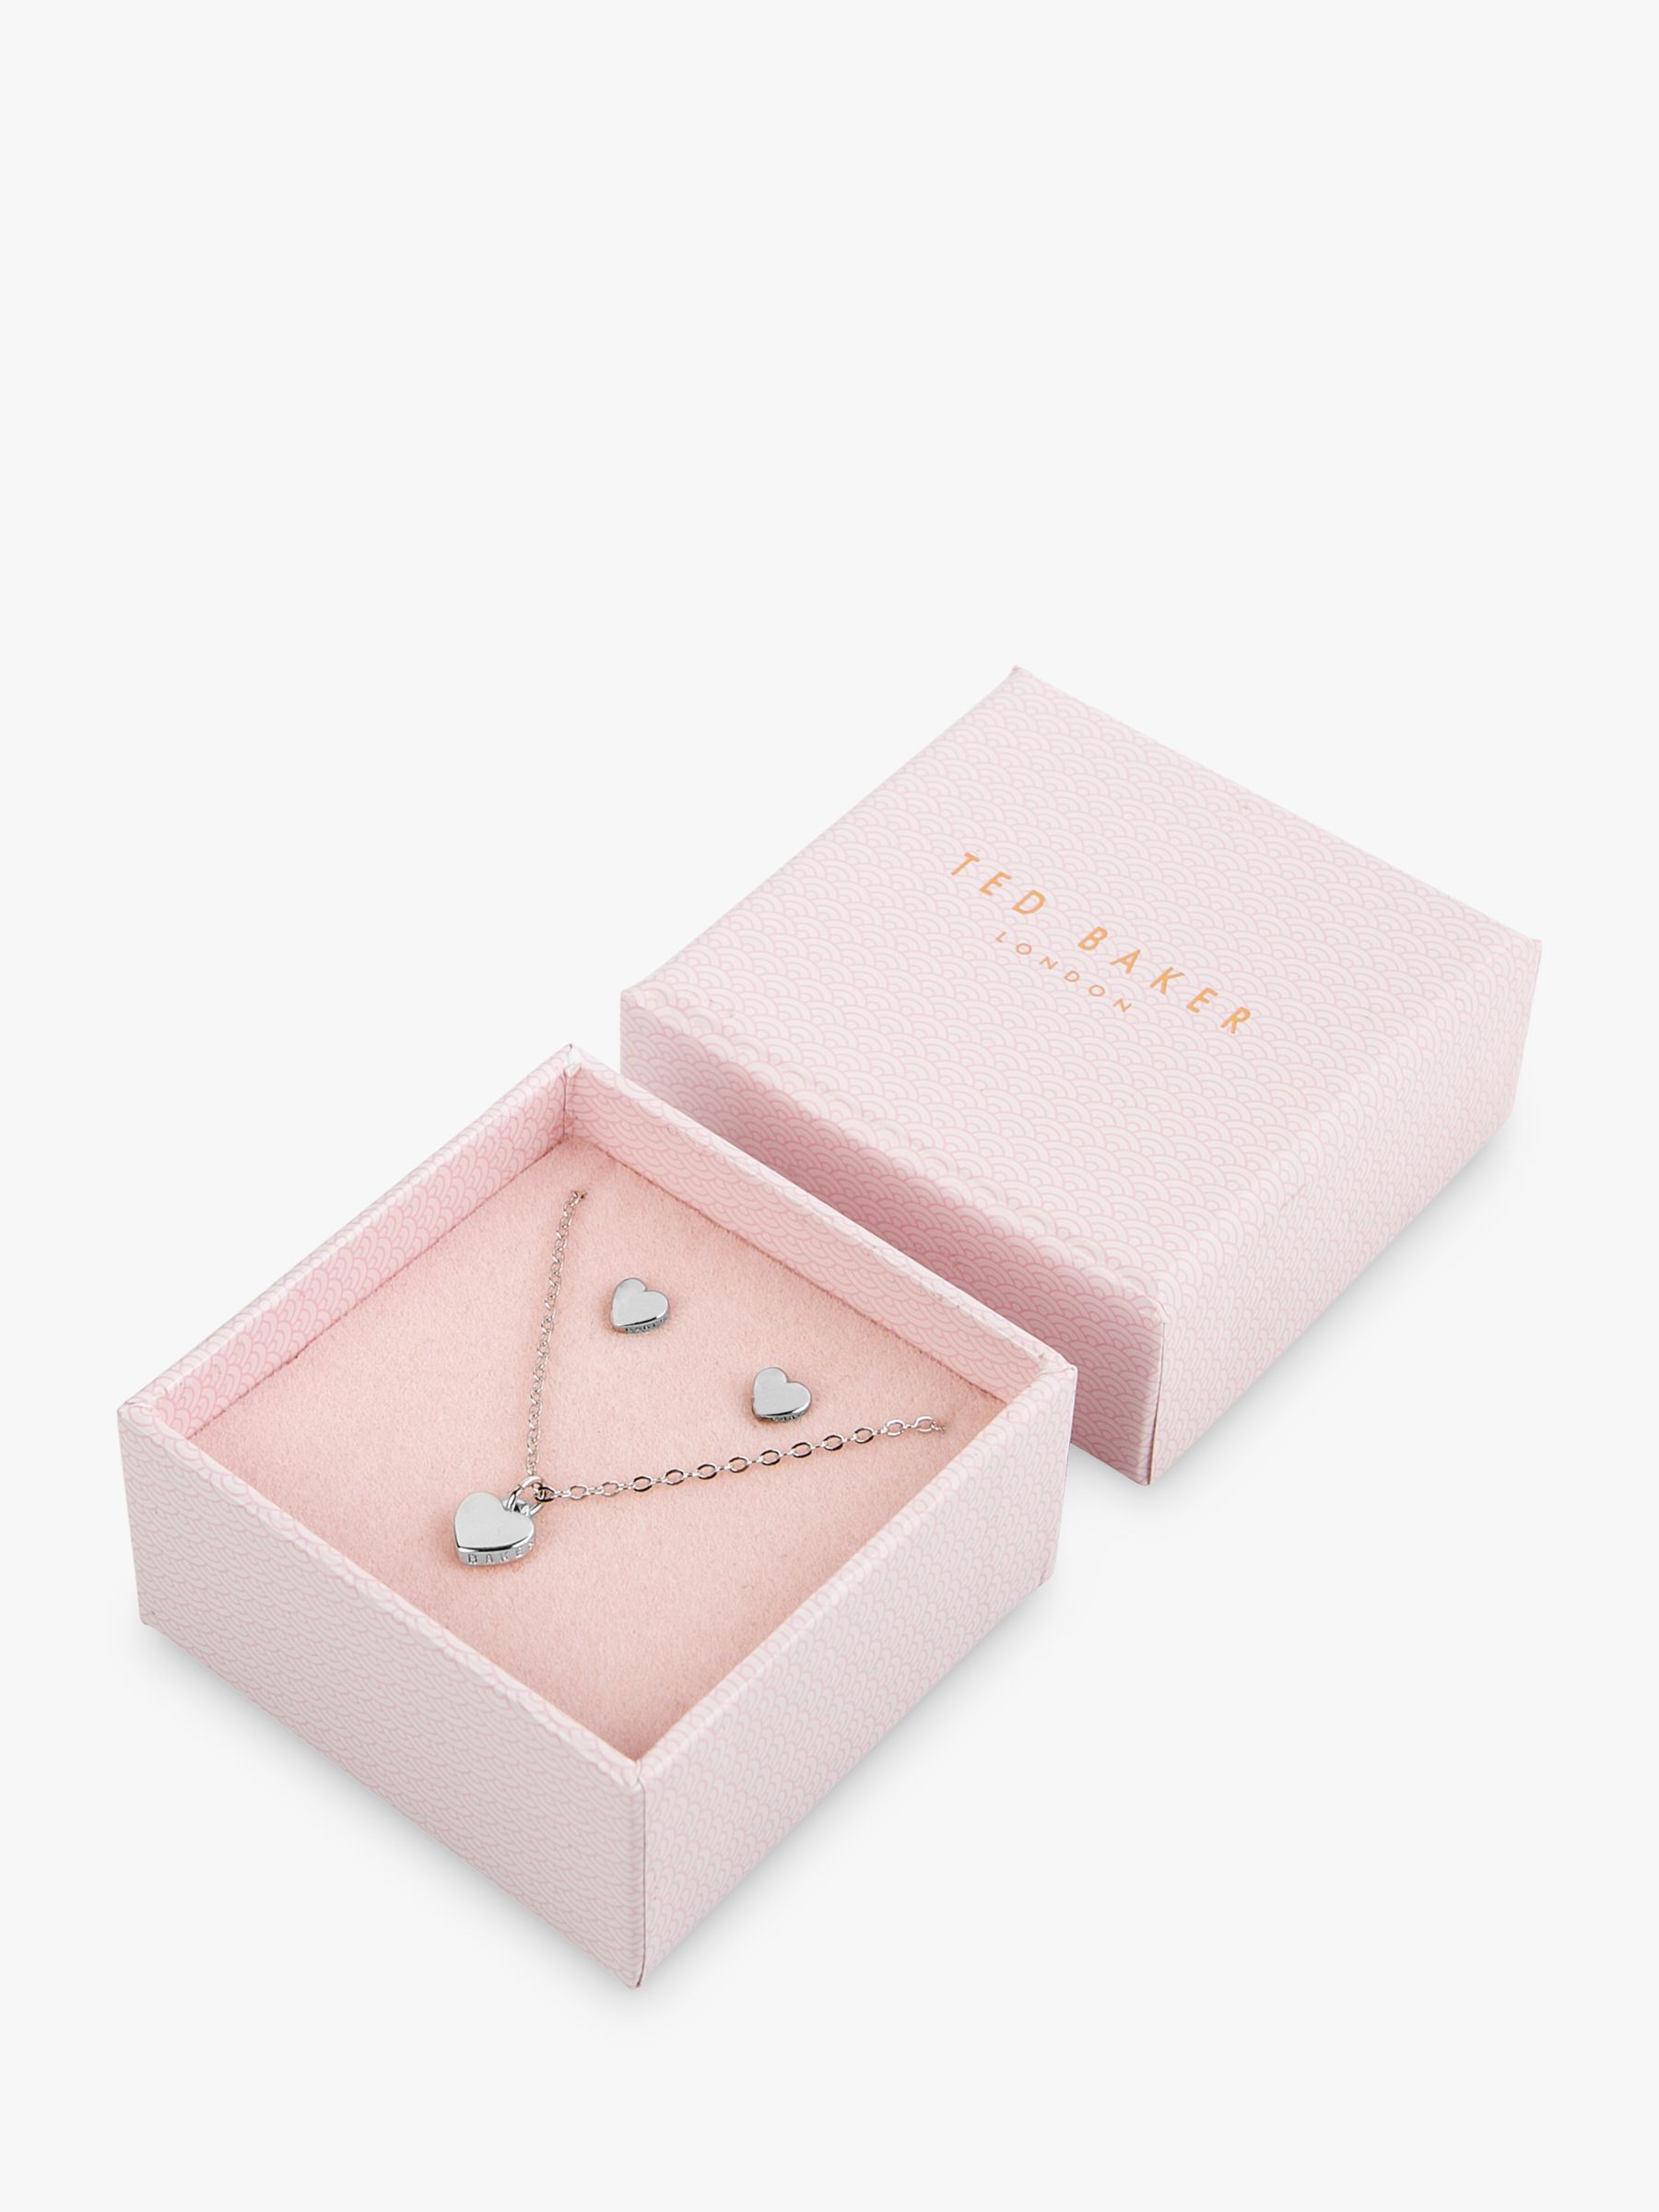 Ted Baker Amoria Heart Stud Earrings and Pendant Necklace Jewellery ...